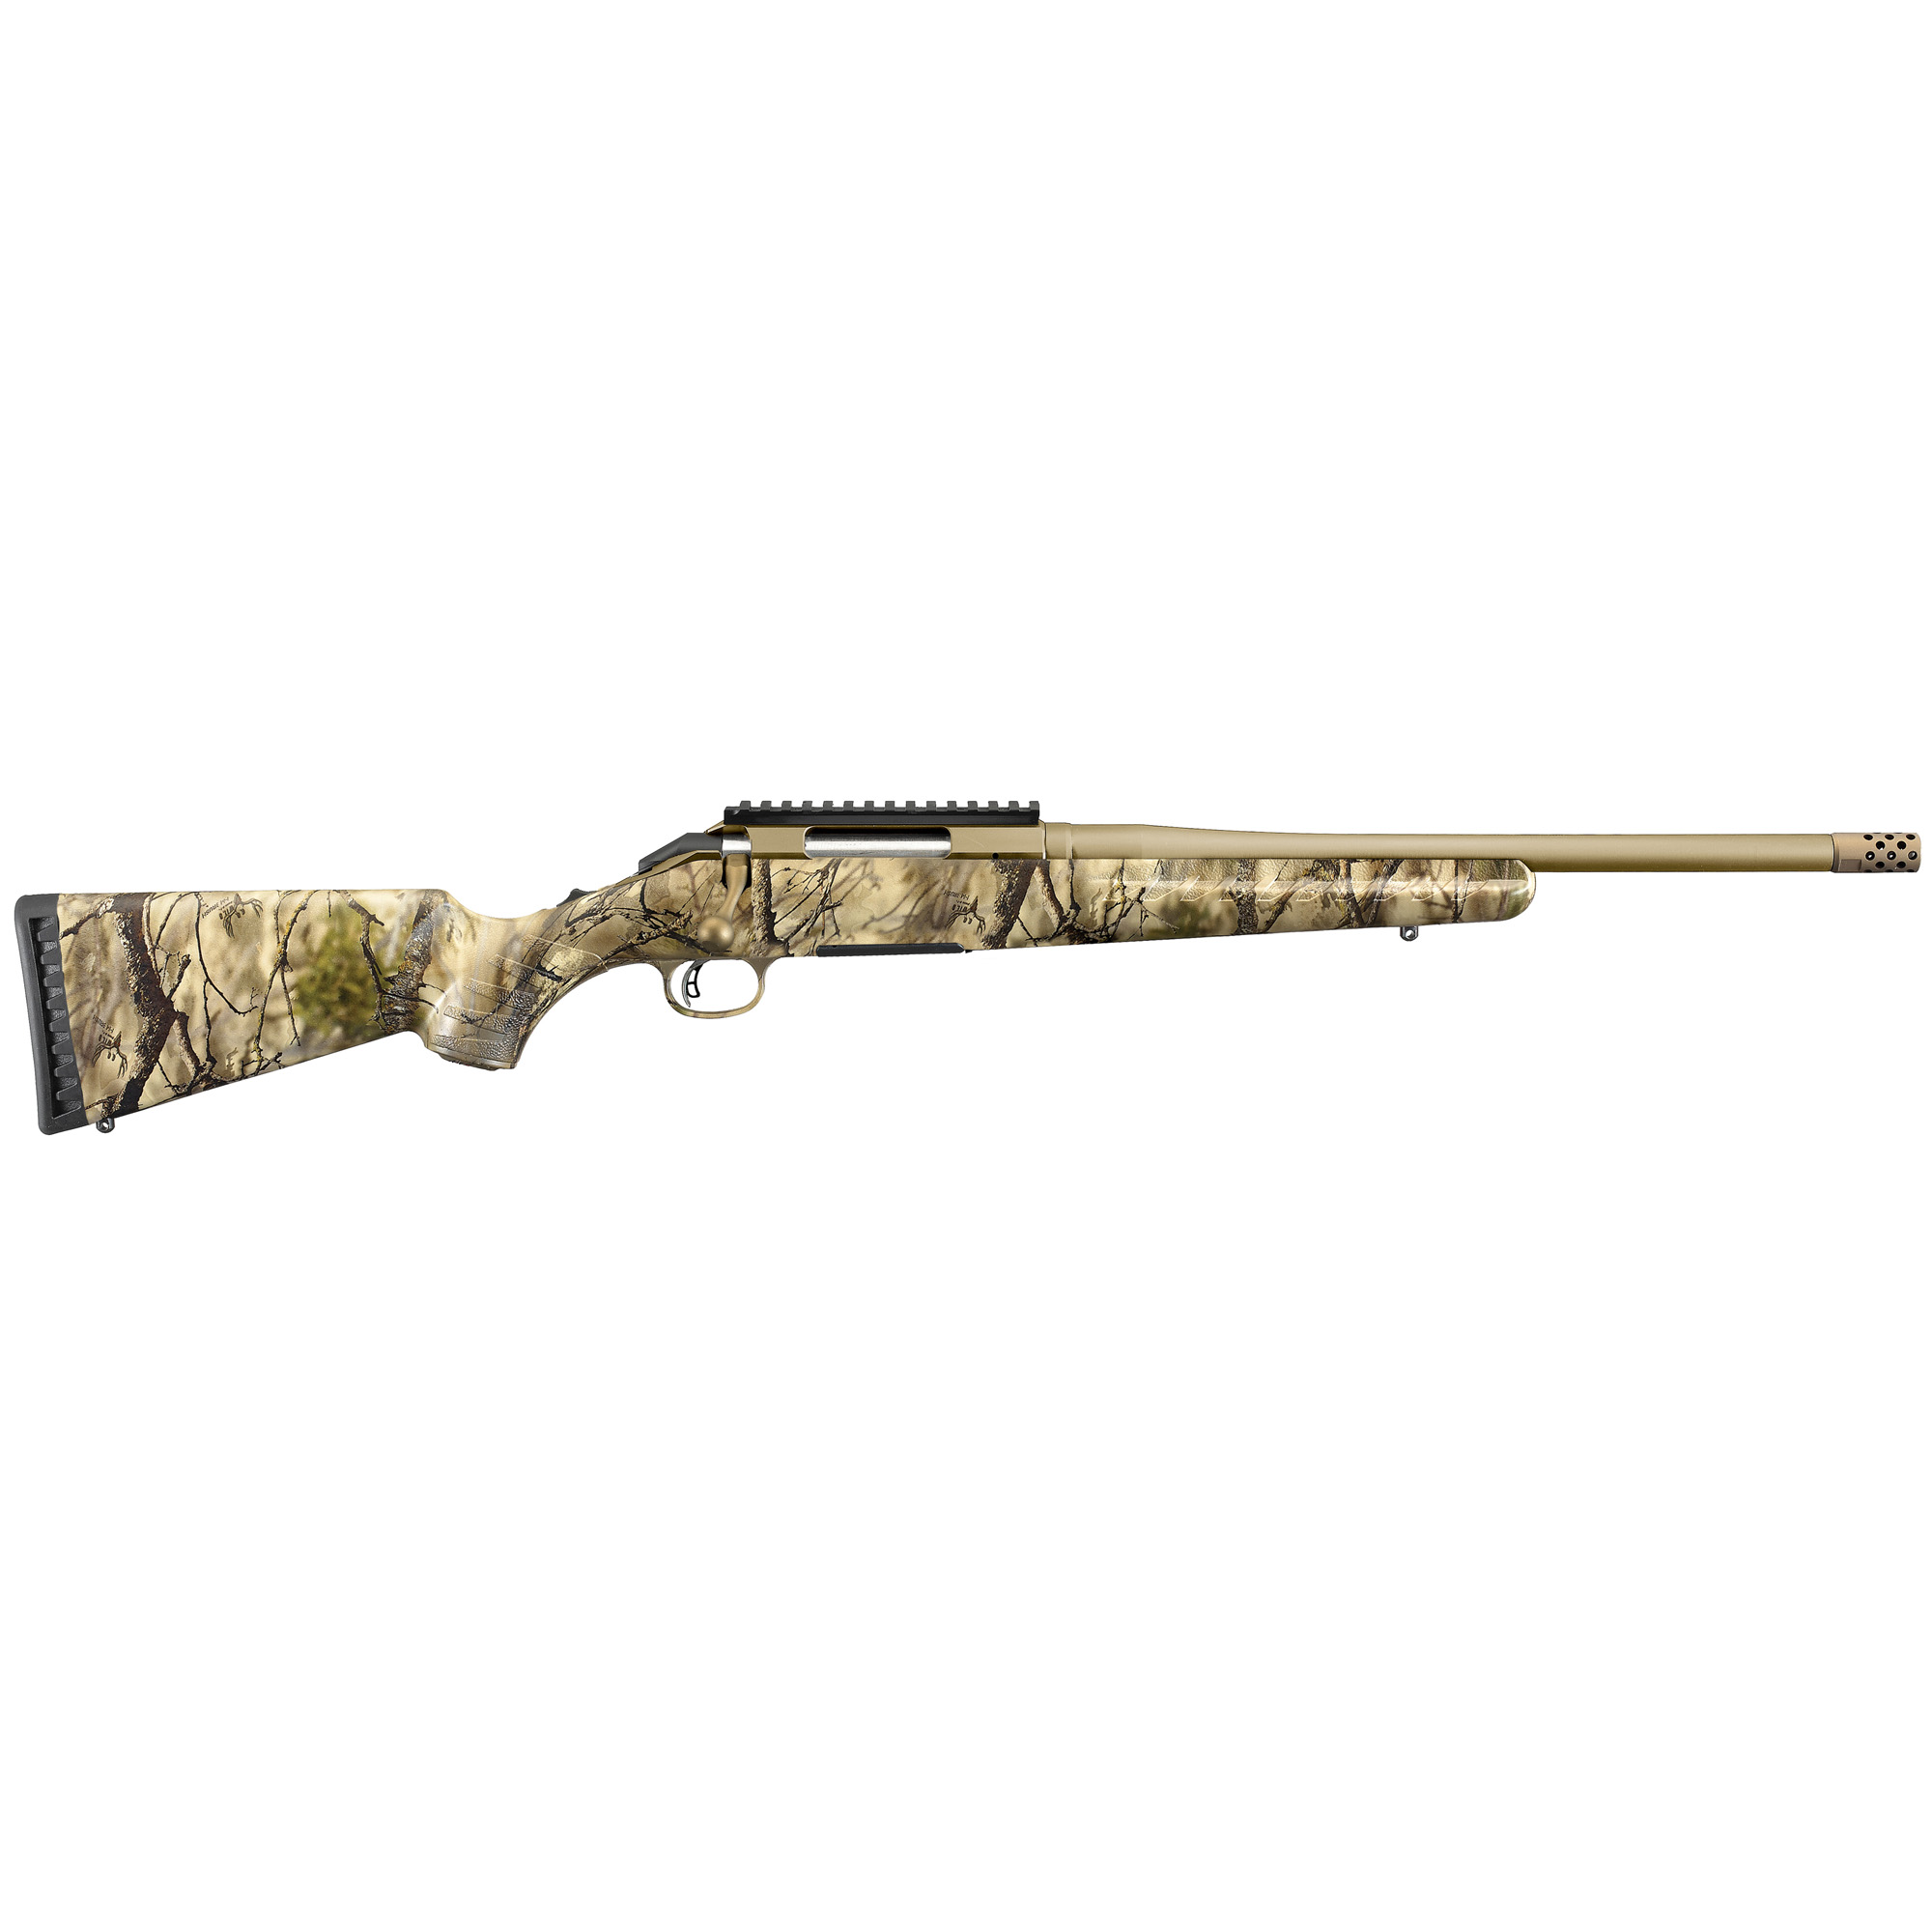 RUGER AMERICAN 243WIN 16.1 CAMO 4RD